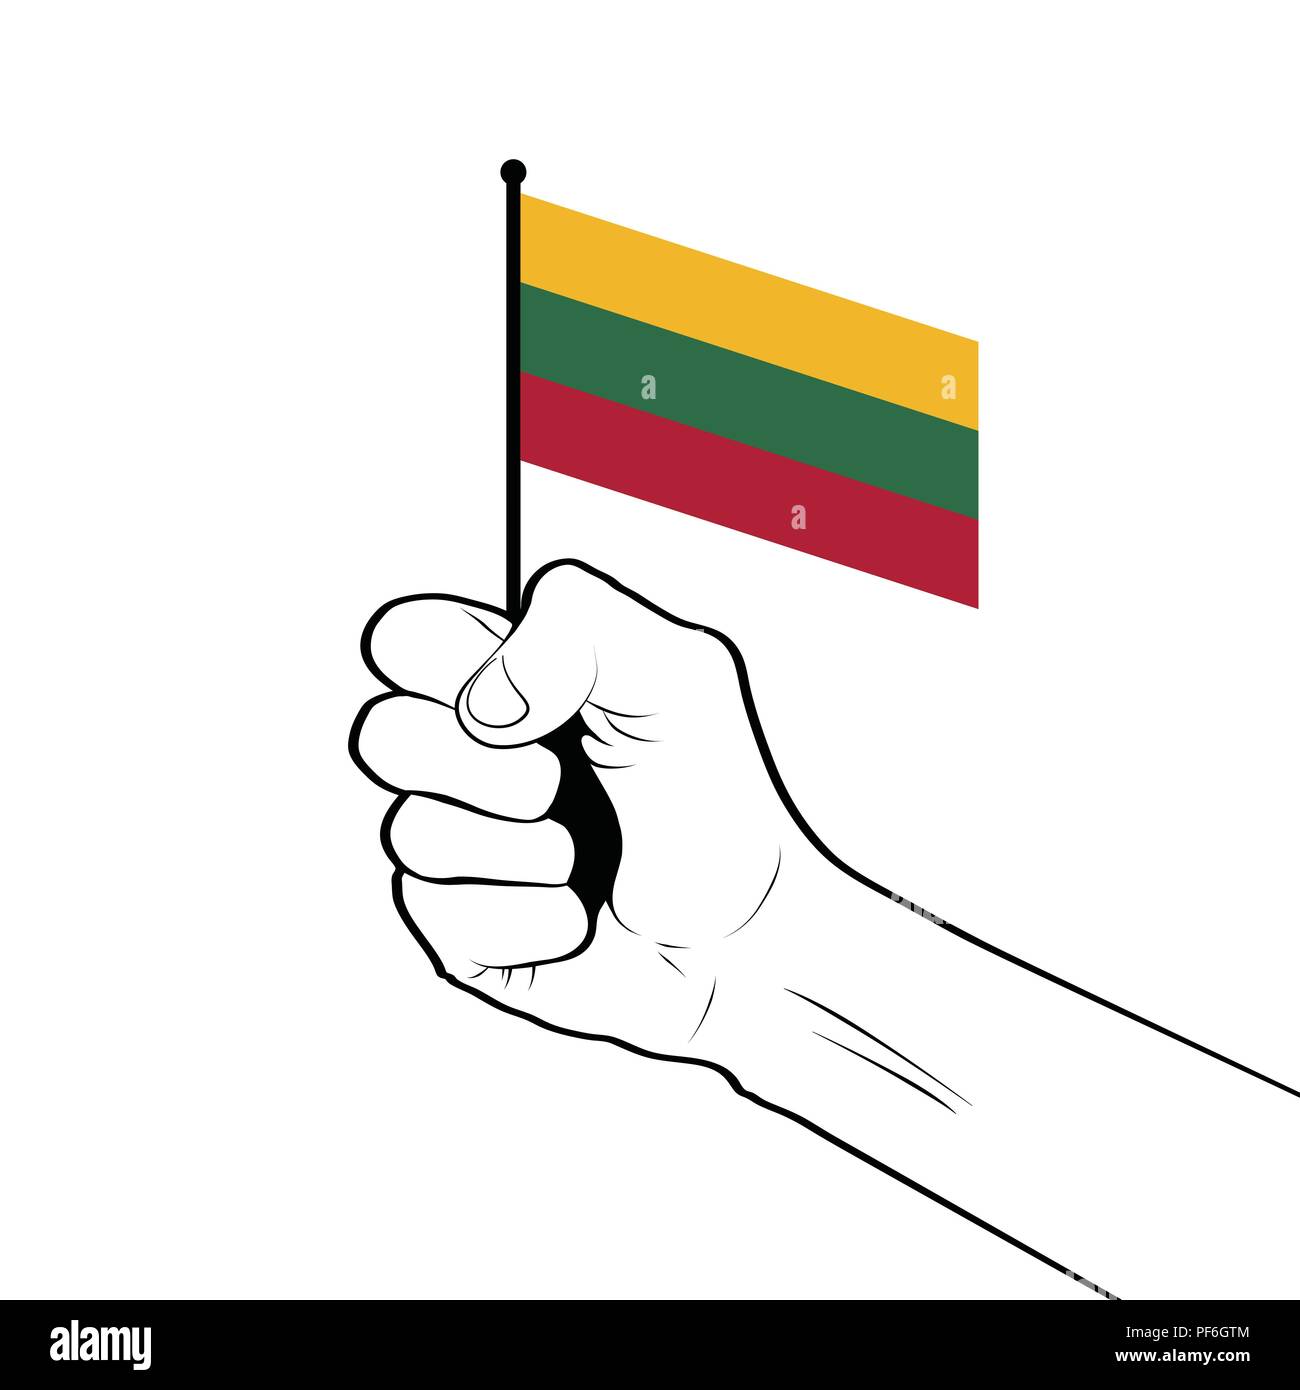 Clenched fist raised in the air holding the national flag of Lithuania Stock Vector